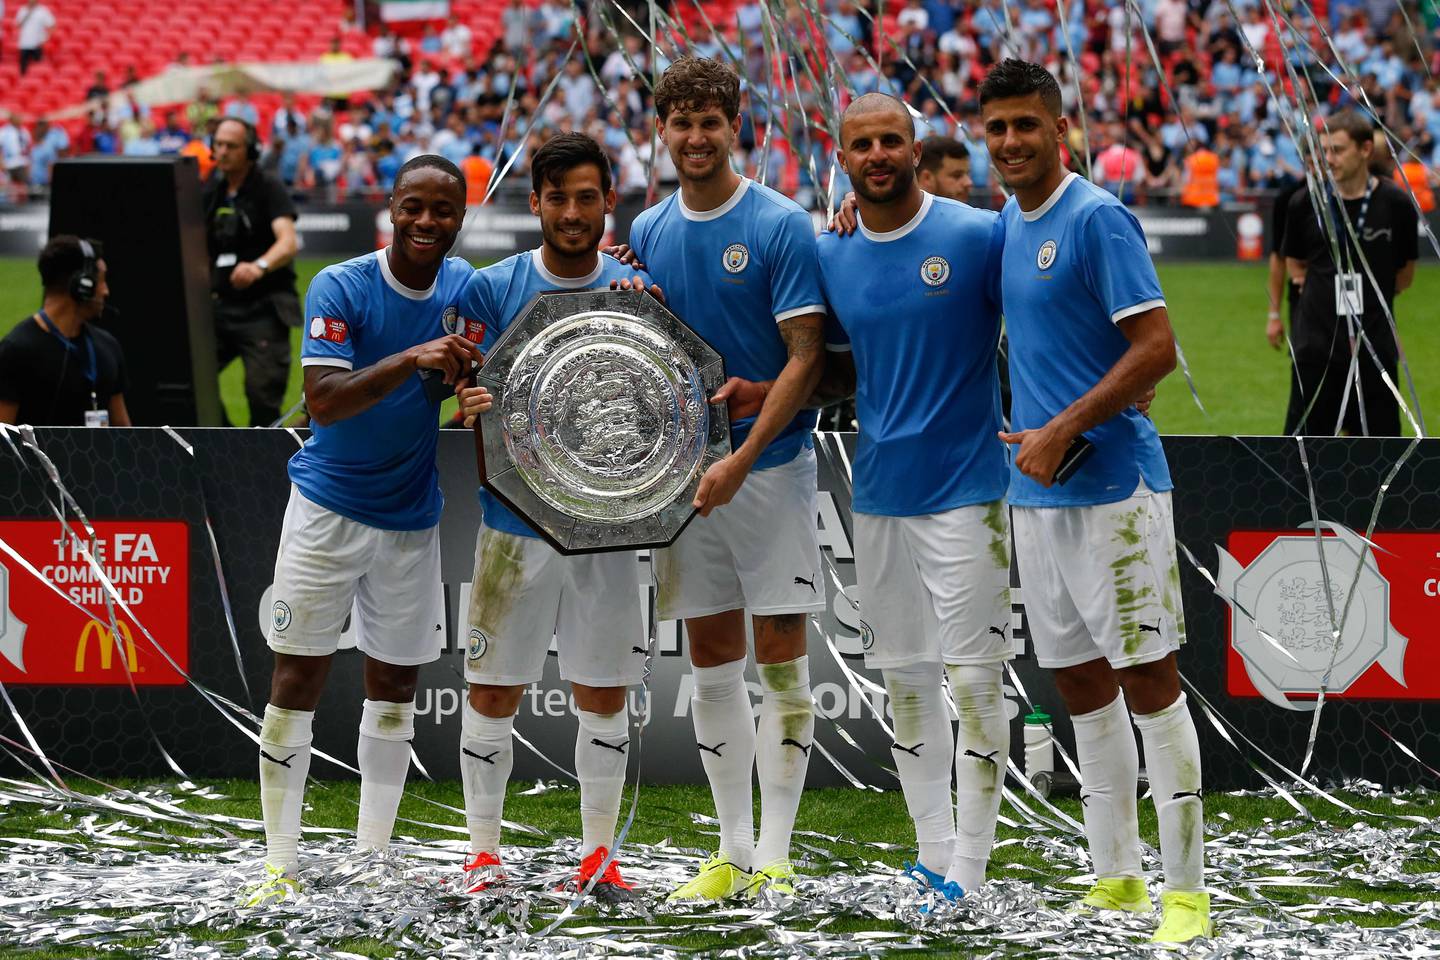 (L-R) Manchester City's English midfielder Raheem Sterling, Manchester City's Spanish midfielder David Silva, Manchester City's English defender John Stones, Manchester City's English defender Kyle Walker and Manchester City's Spanish midfielder Rodrigo pose with the trophy after winning the English FA Community Shield football match between Manchester City and Liverpool at Wembley Stadium in north London on August 4, 2019. (Photo by Ian KINGTON / AFP) / NOT FOR MARKETING OR ADVERTISING USE / RESTRICTED TO EDITORIAL USE